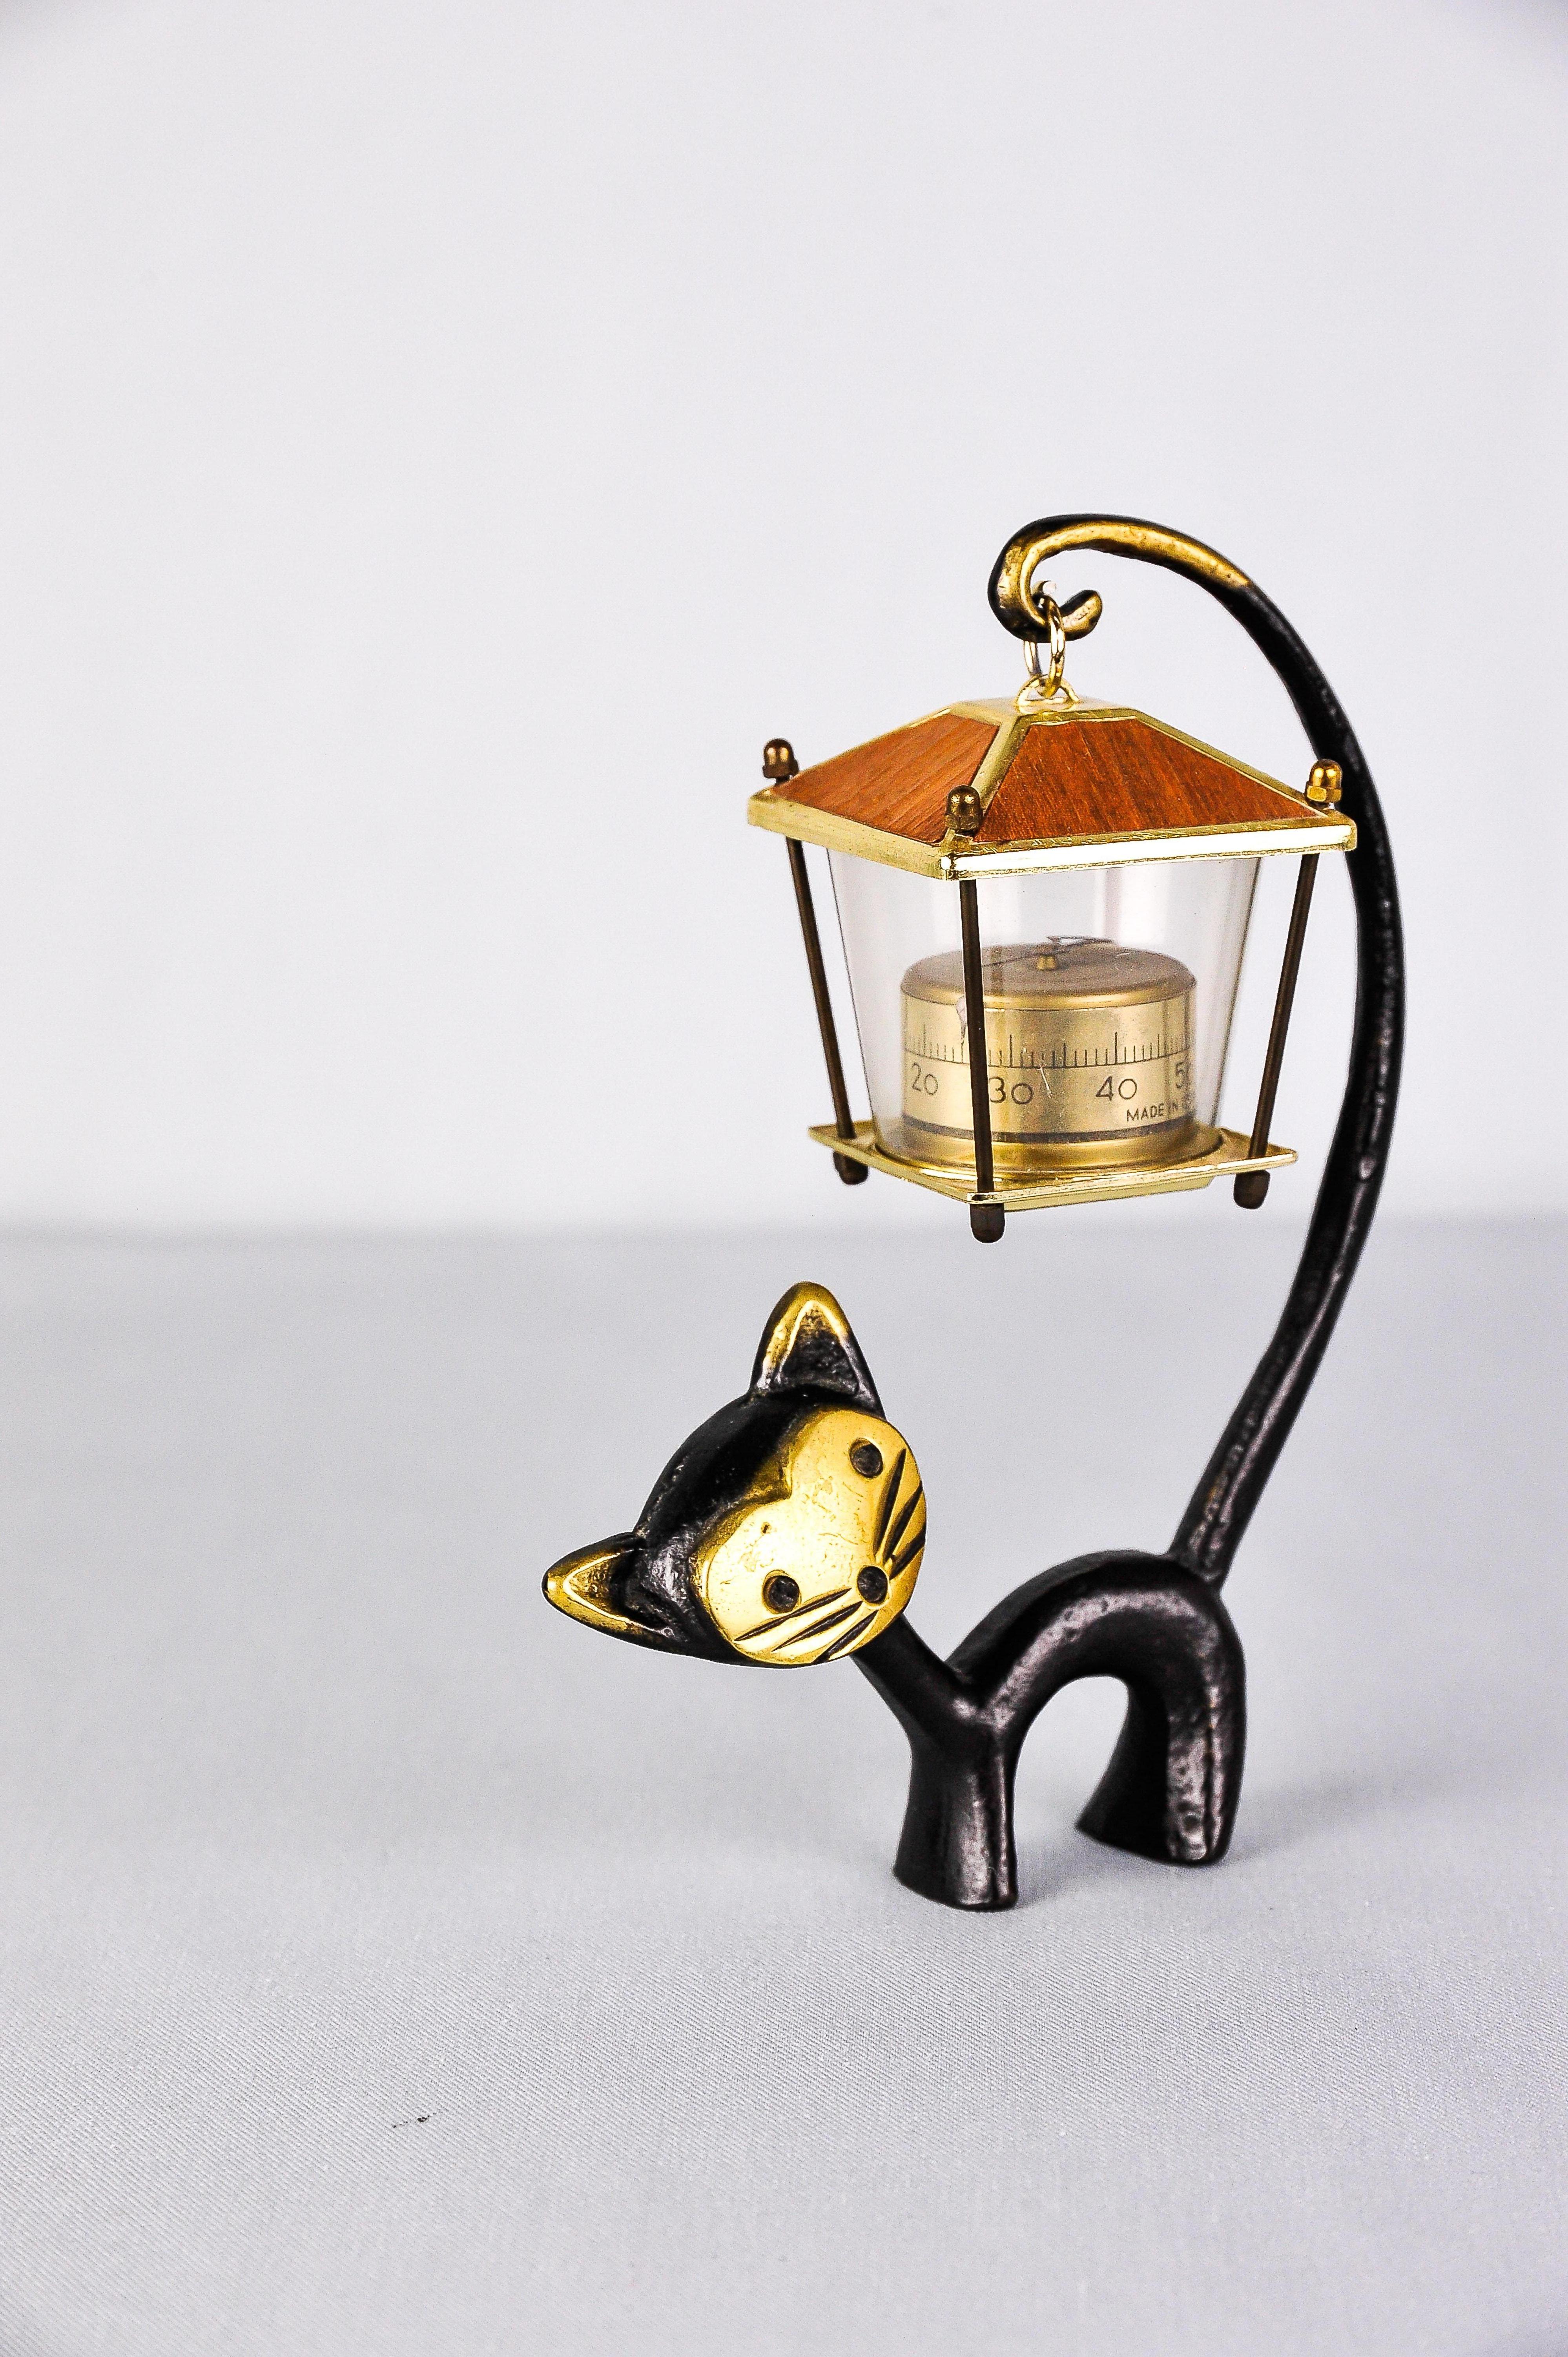 A very charming Austrian desk thermometer, consisting of a nice cat figurine and a lantern-shaped thermometer. A very humorous design by Walter Bosse, executed by Hertha Baller Austria in the 1950s. Made of brass, in good condition.